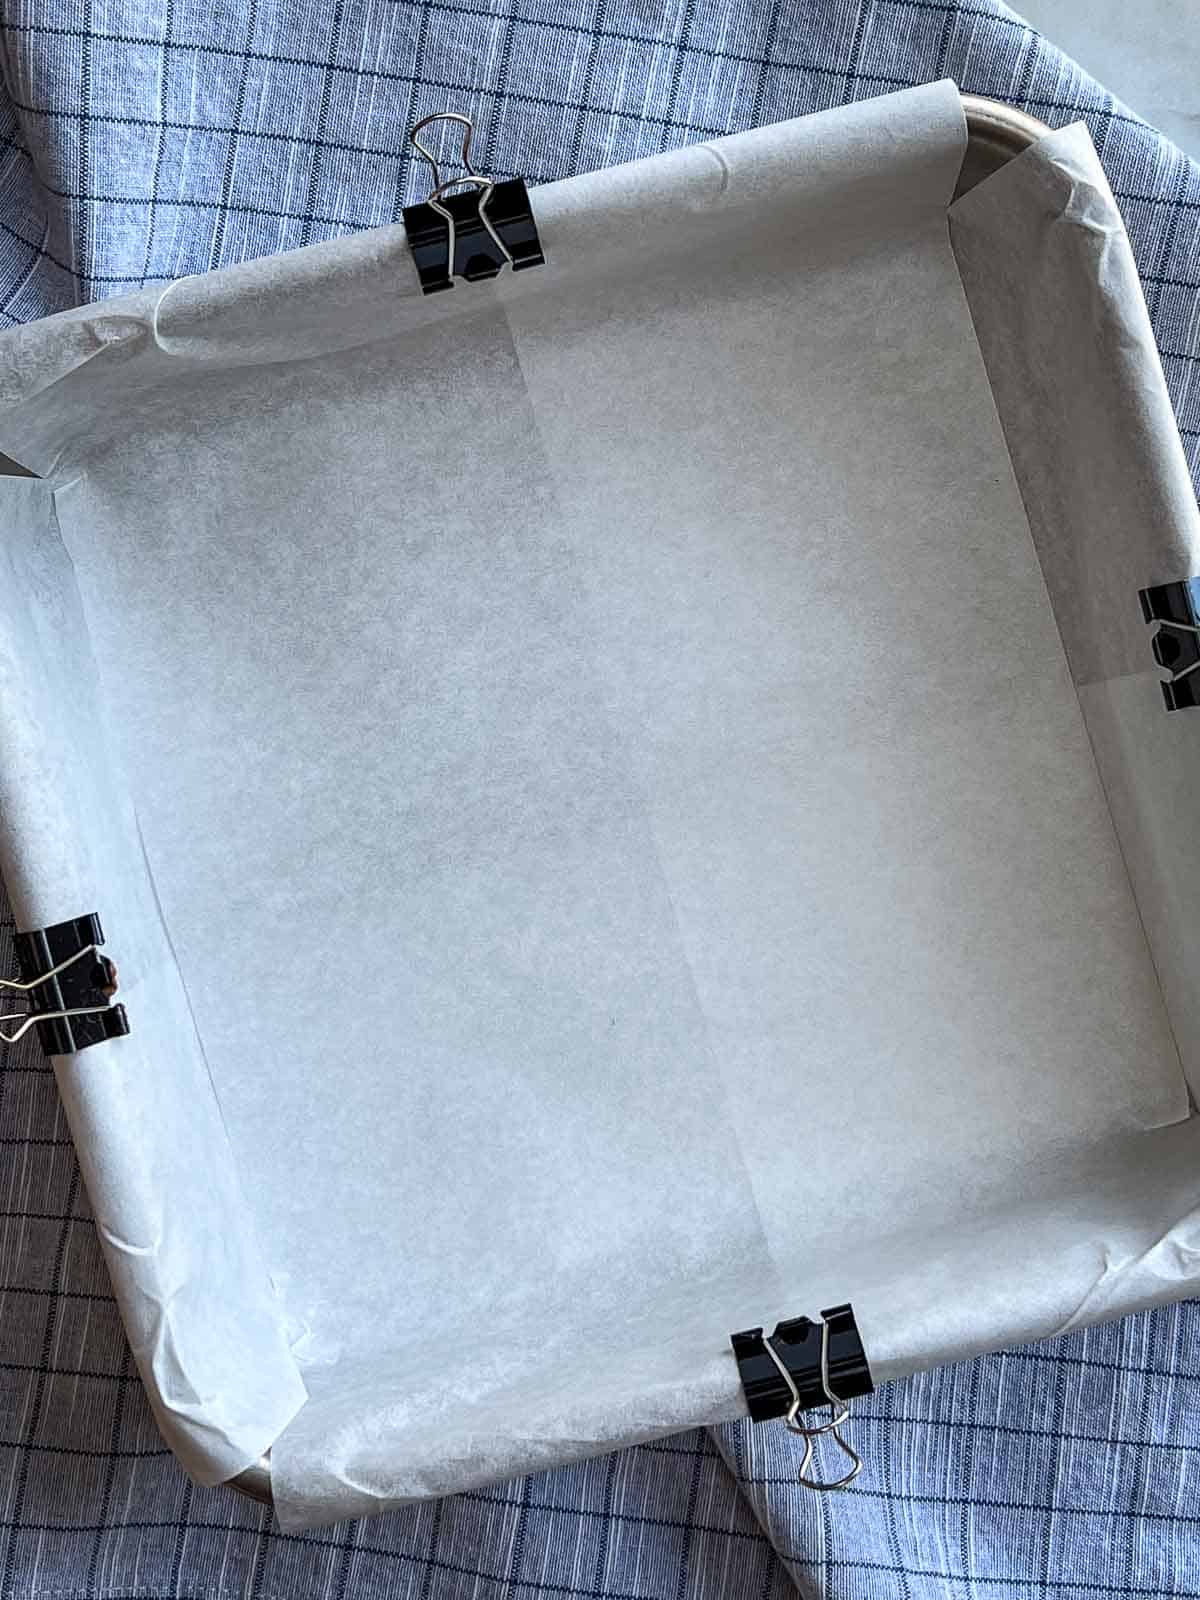 Square baking pan that has been lined with parchment paper held in place by a binder clip on the each side.